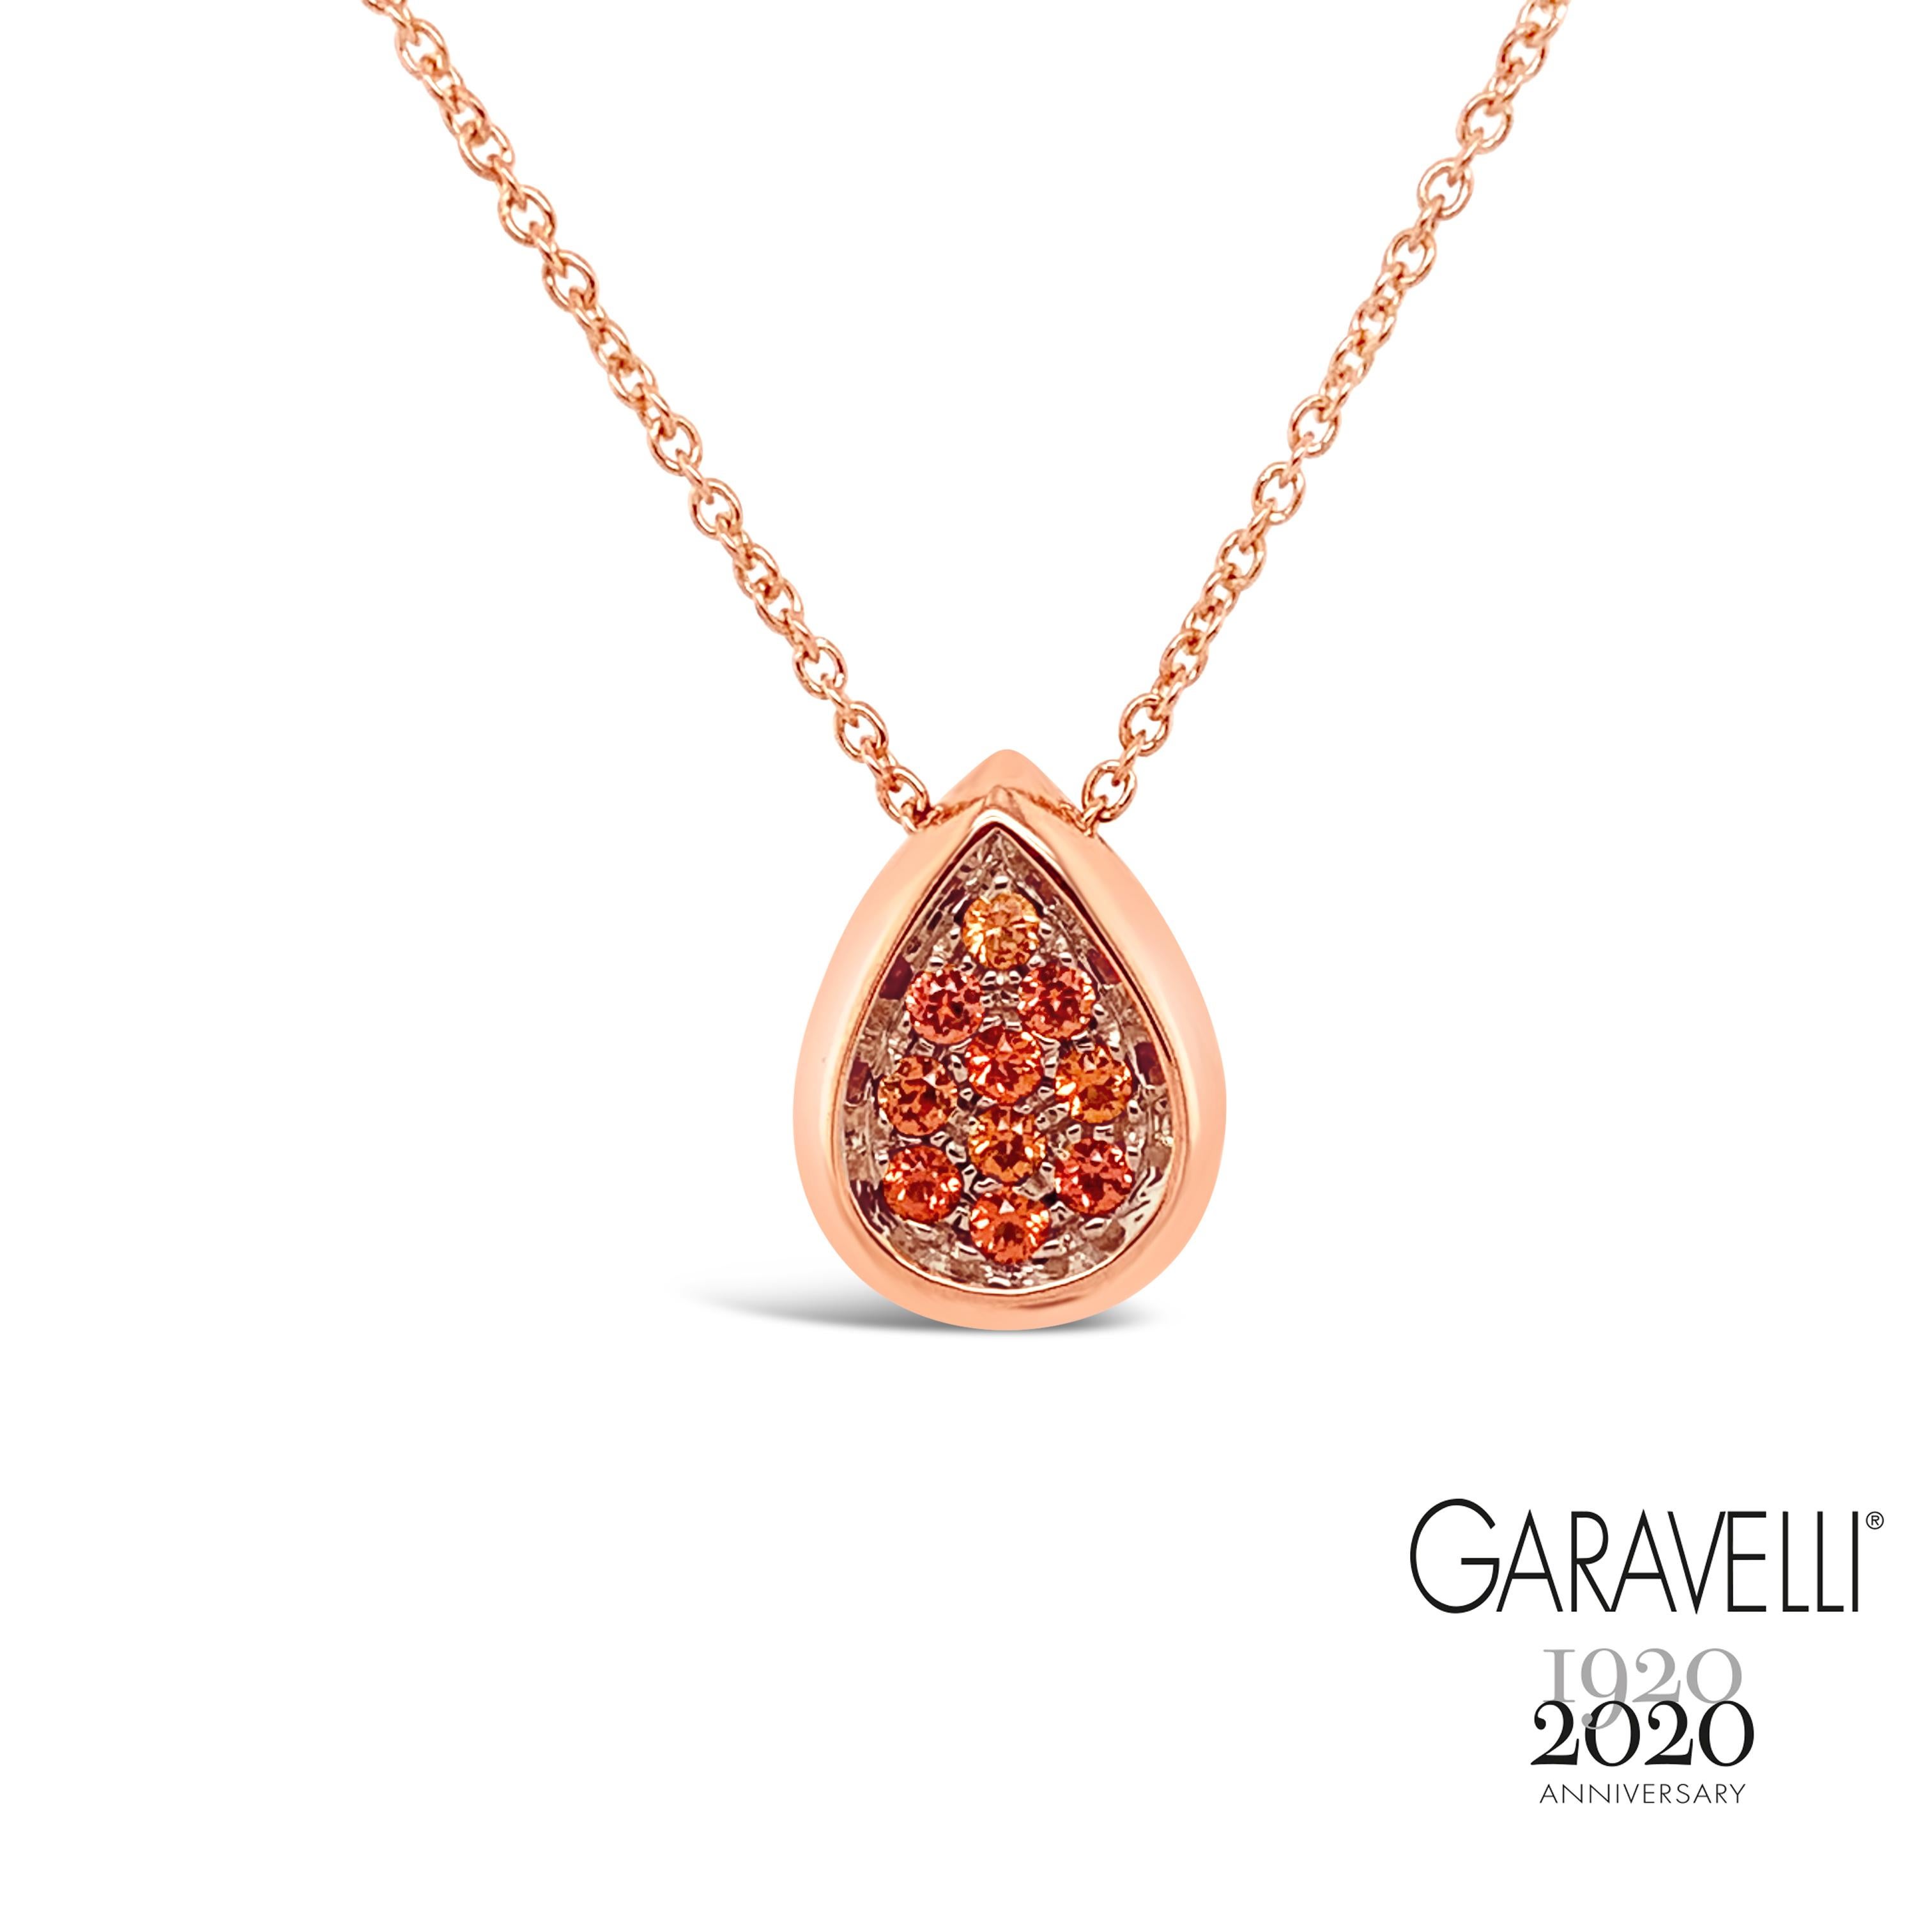 Garavelli DROP Pendant in 18kt Rose Gold with White Diamonds
The new Giotto Collection DROP pendant .
Also at your choice: Rubies, Orange Sapphires, Peridot, Aquamarine   or Brown Diamonds
18kt gold Necklace included , lenght 19 inches with a loop